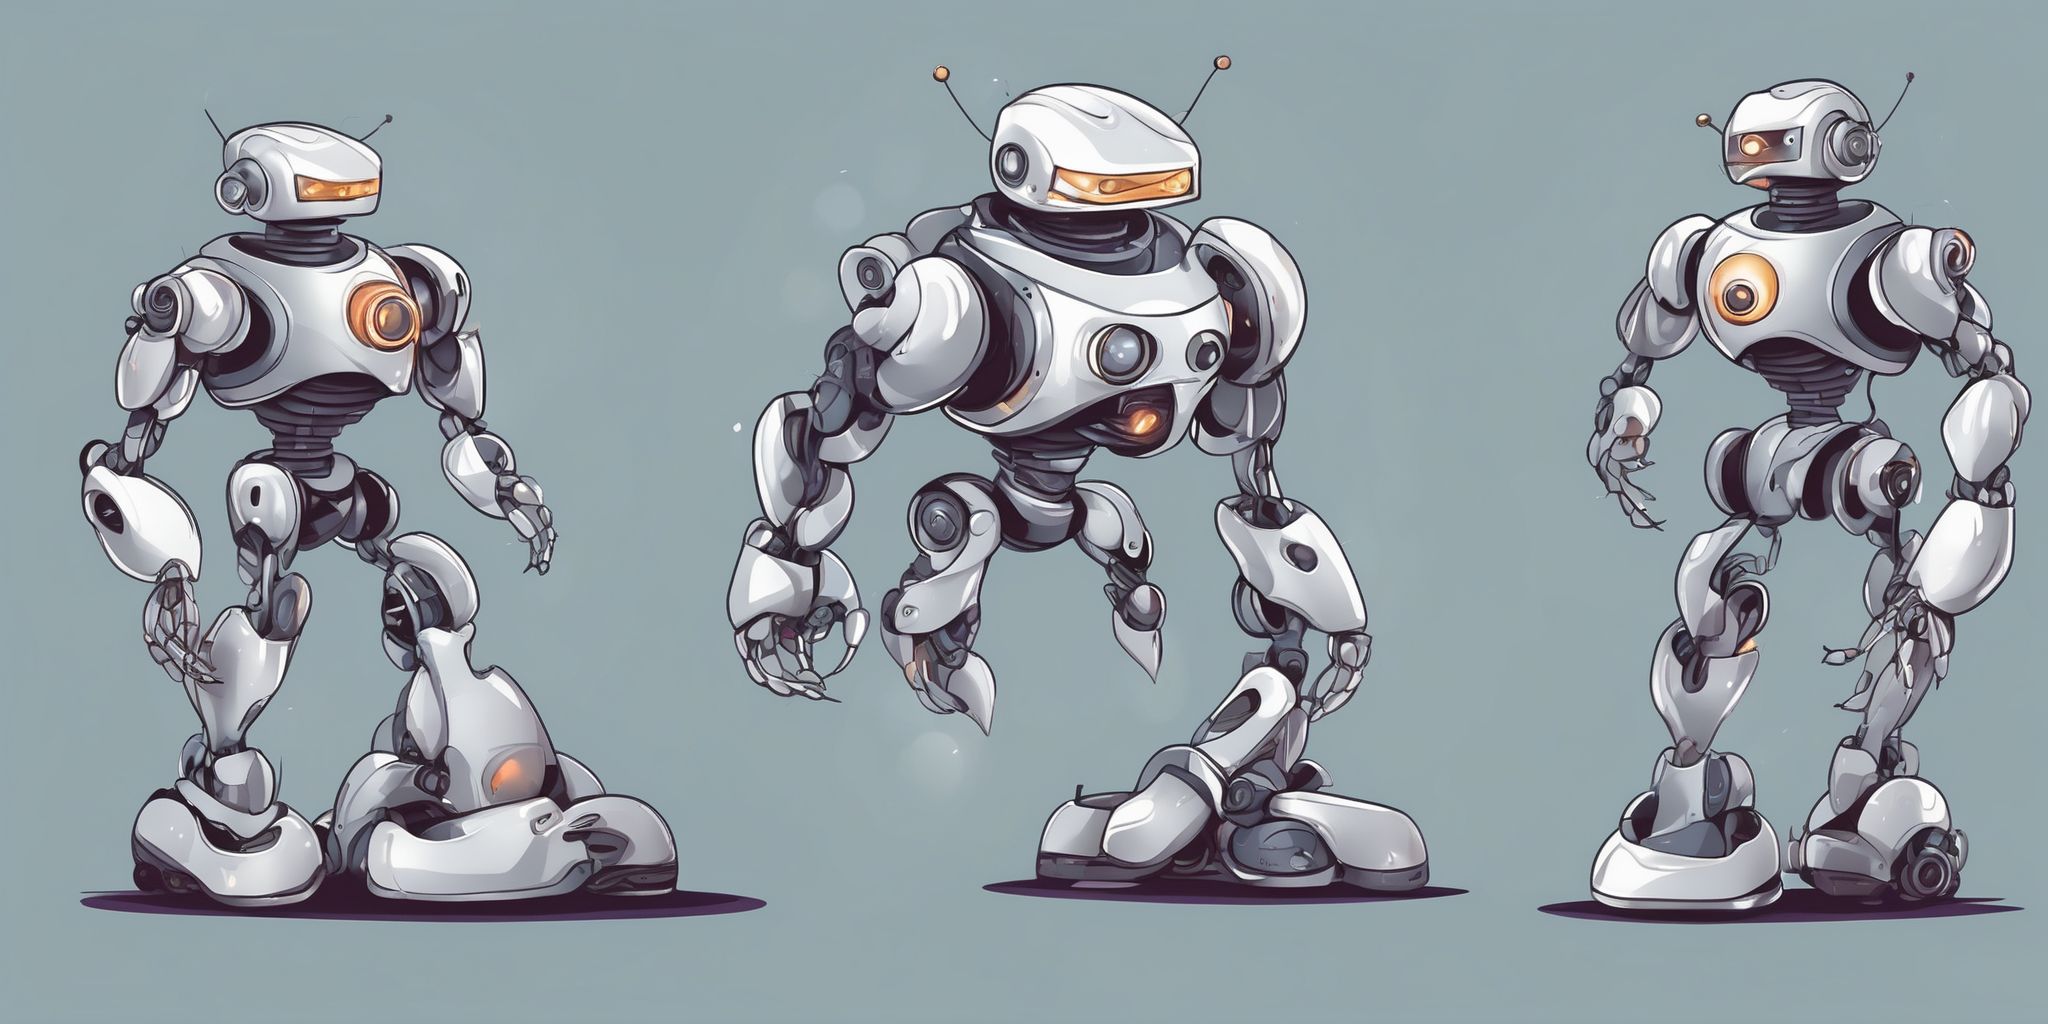 Robot in illustration style with gradients and white background